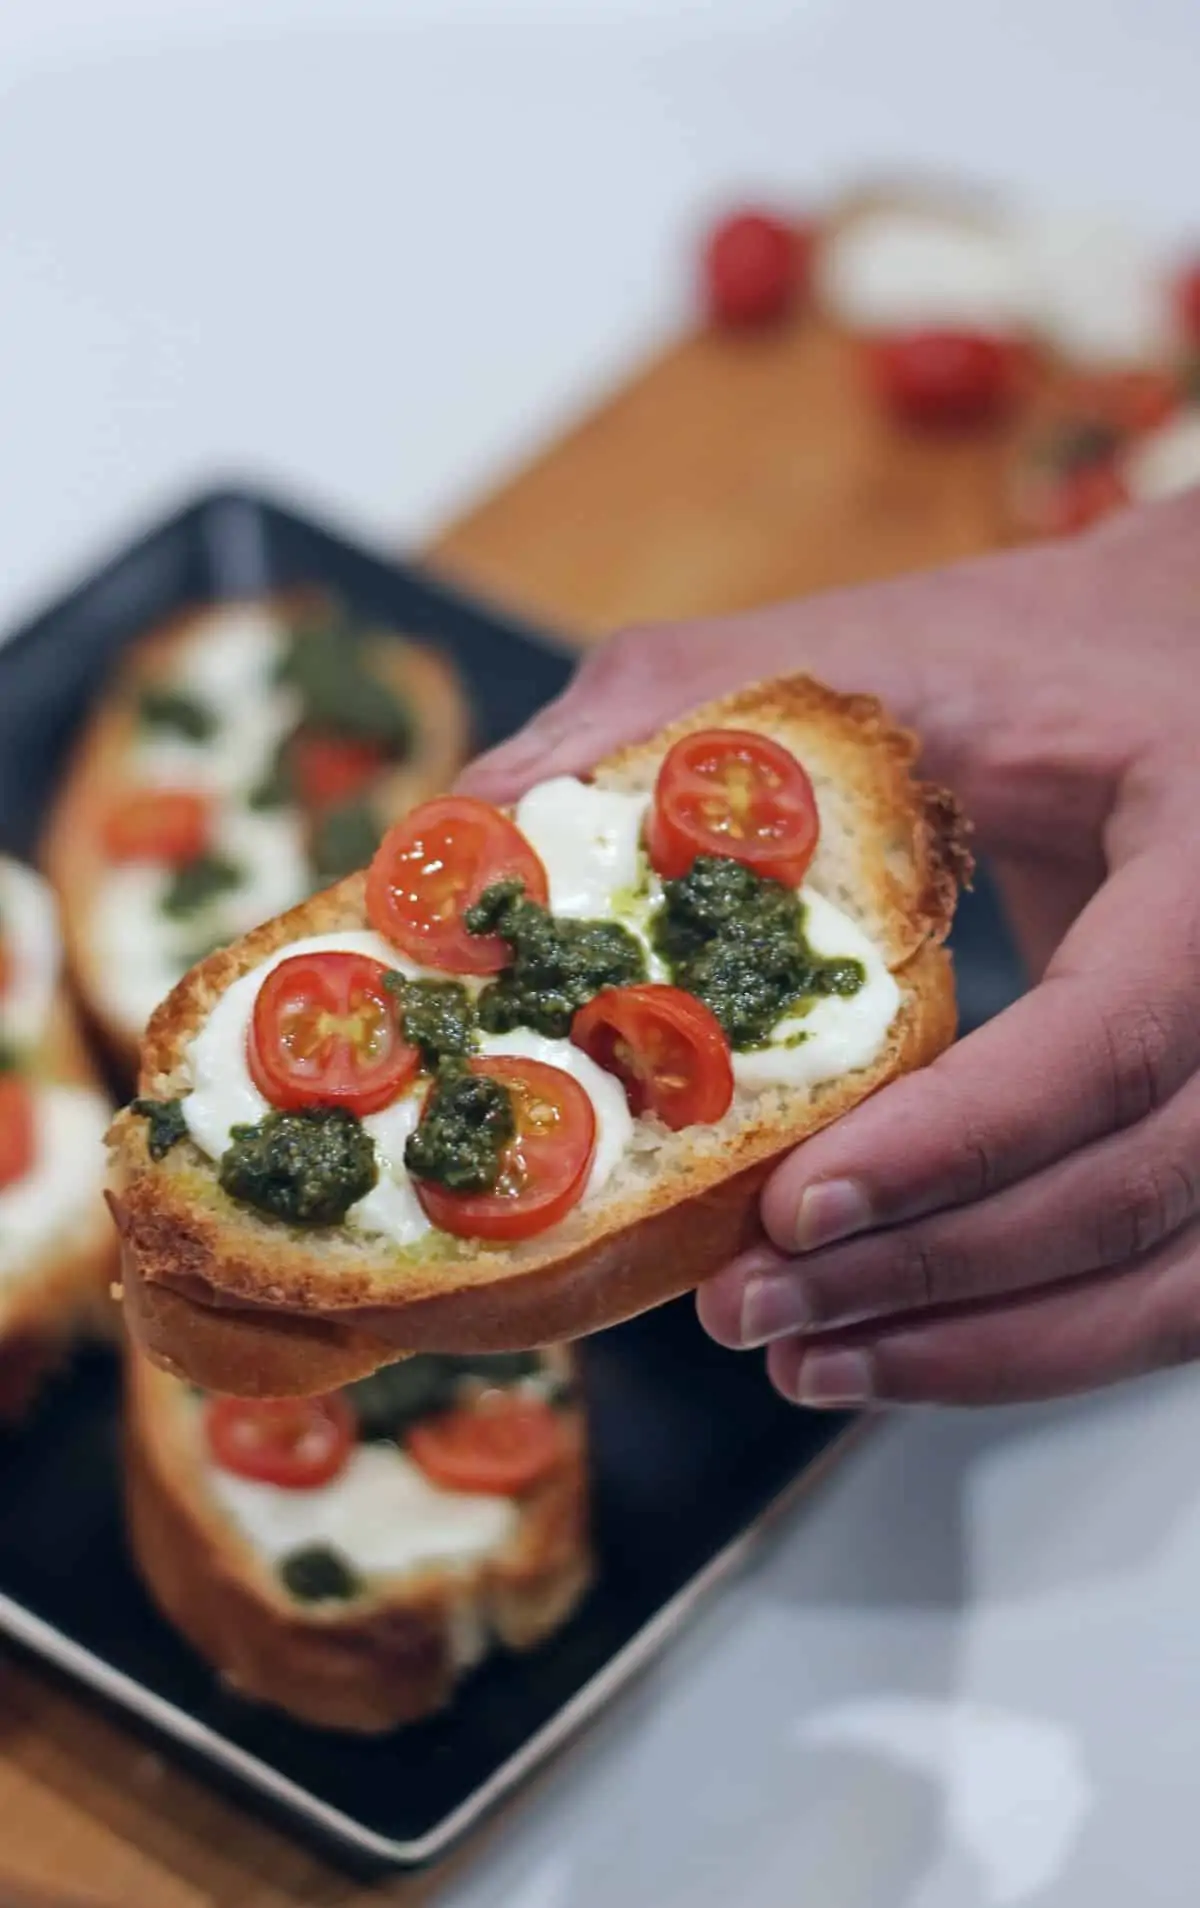 A single crostini with tomato, pesto and cheese held in hand